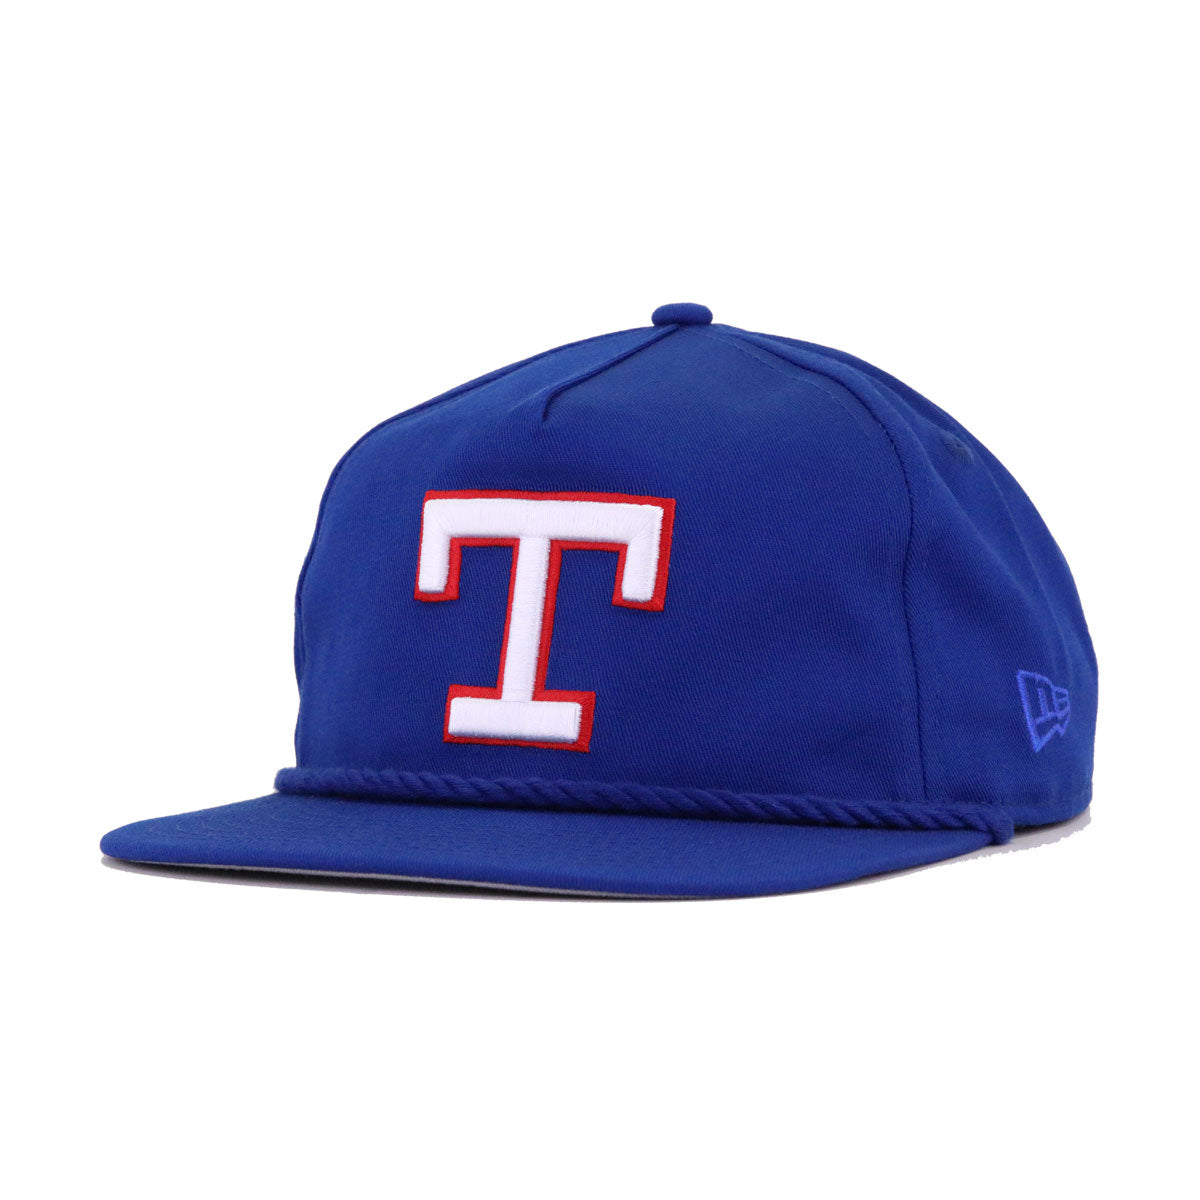 Royal Blue Texas Rangers 40th Anniversary New Era Fitted Hat